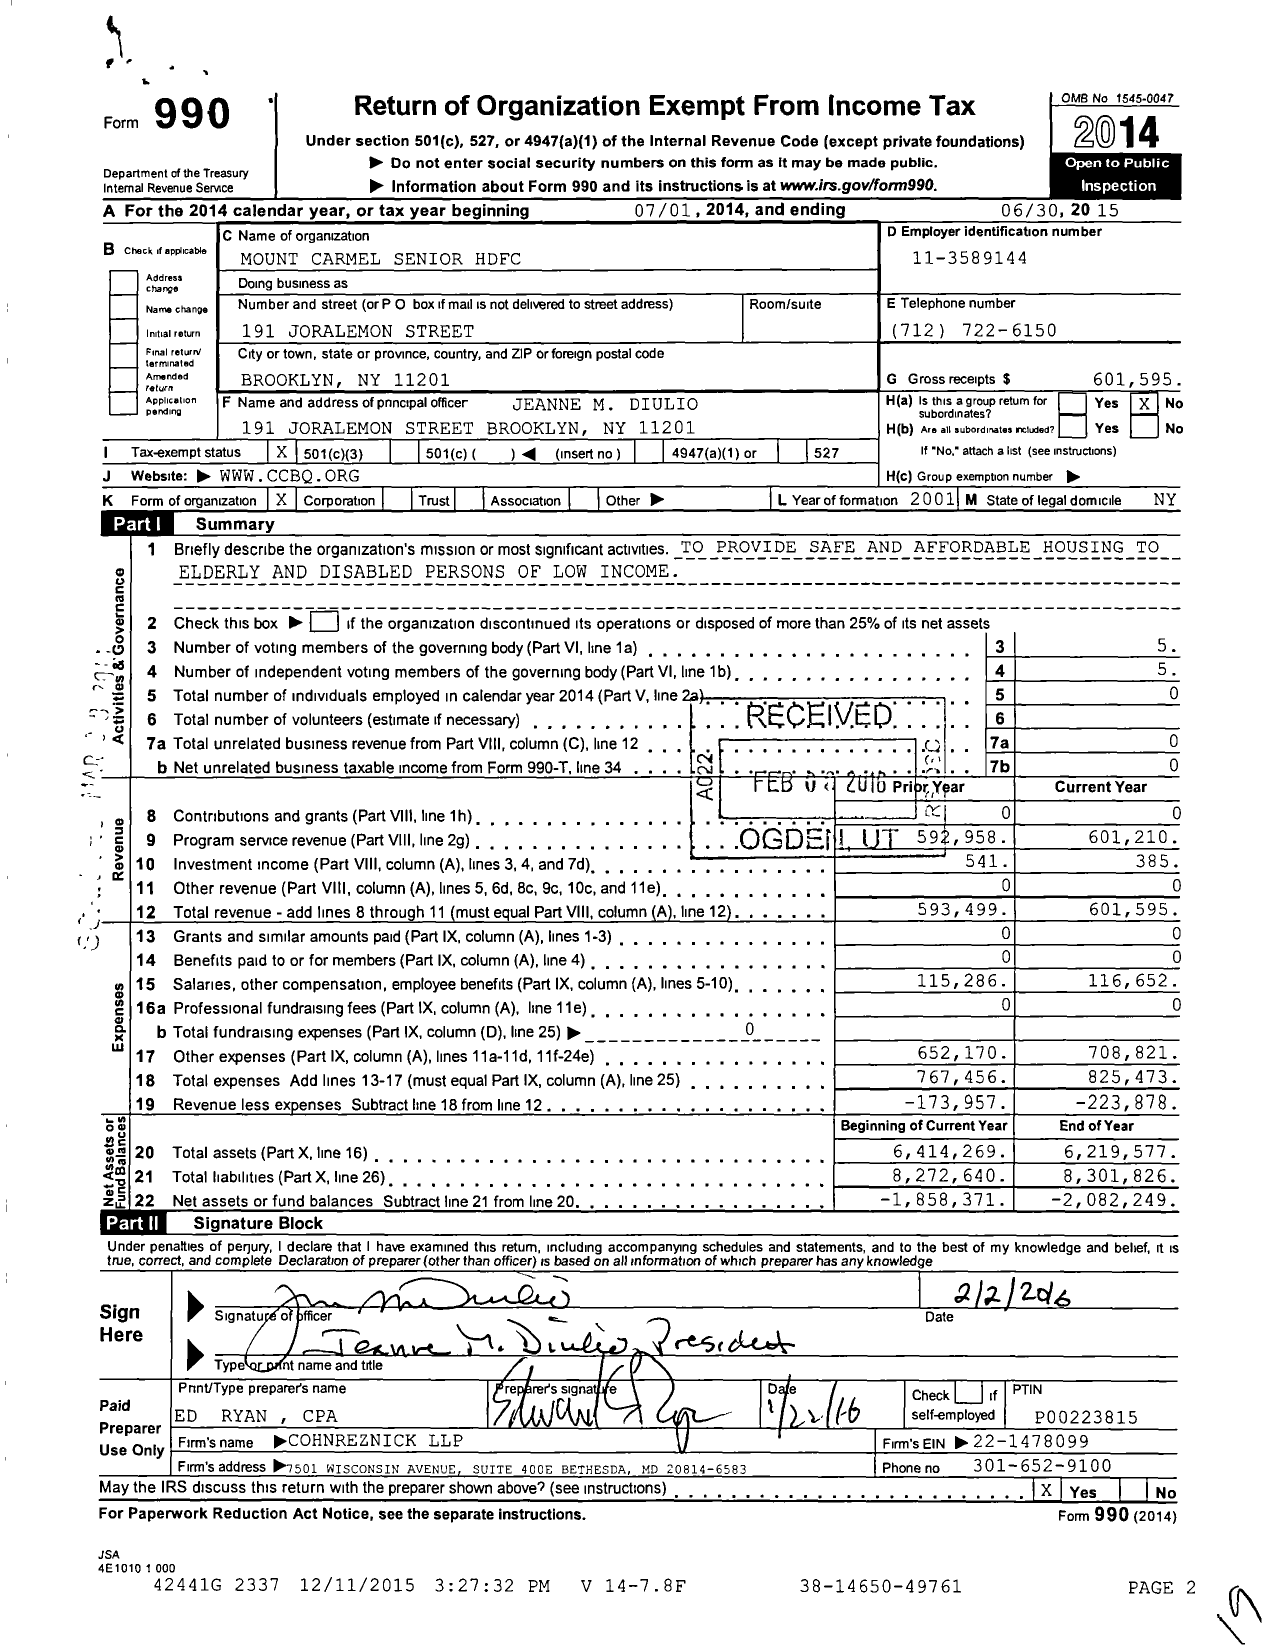 Image of first page of 2014 Form 990 for Mount Carmel Senior HDFC